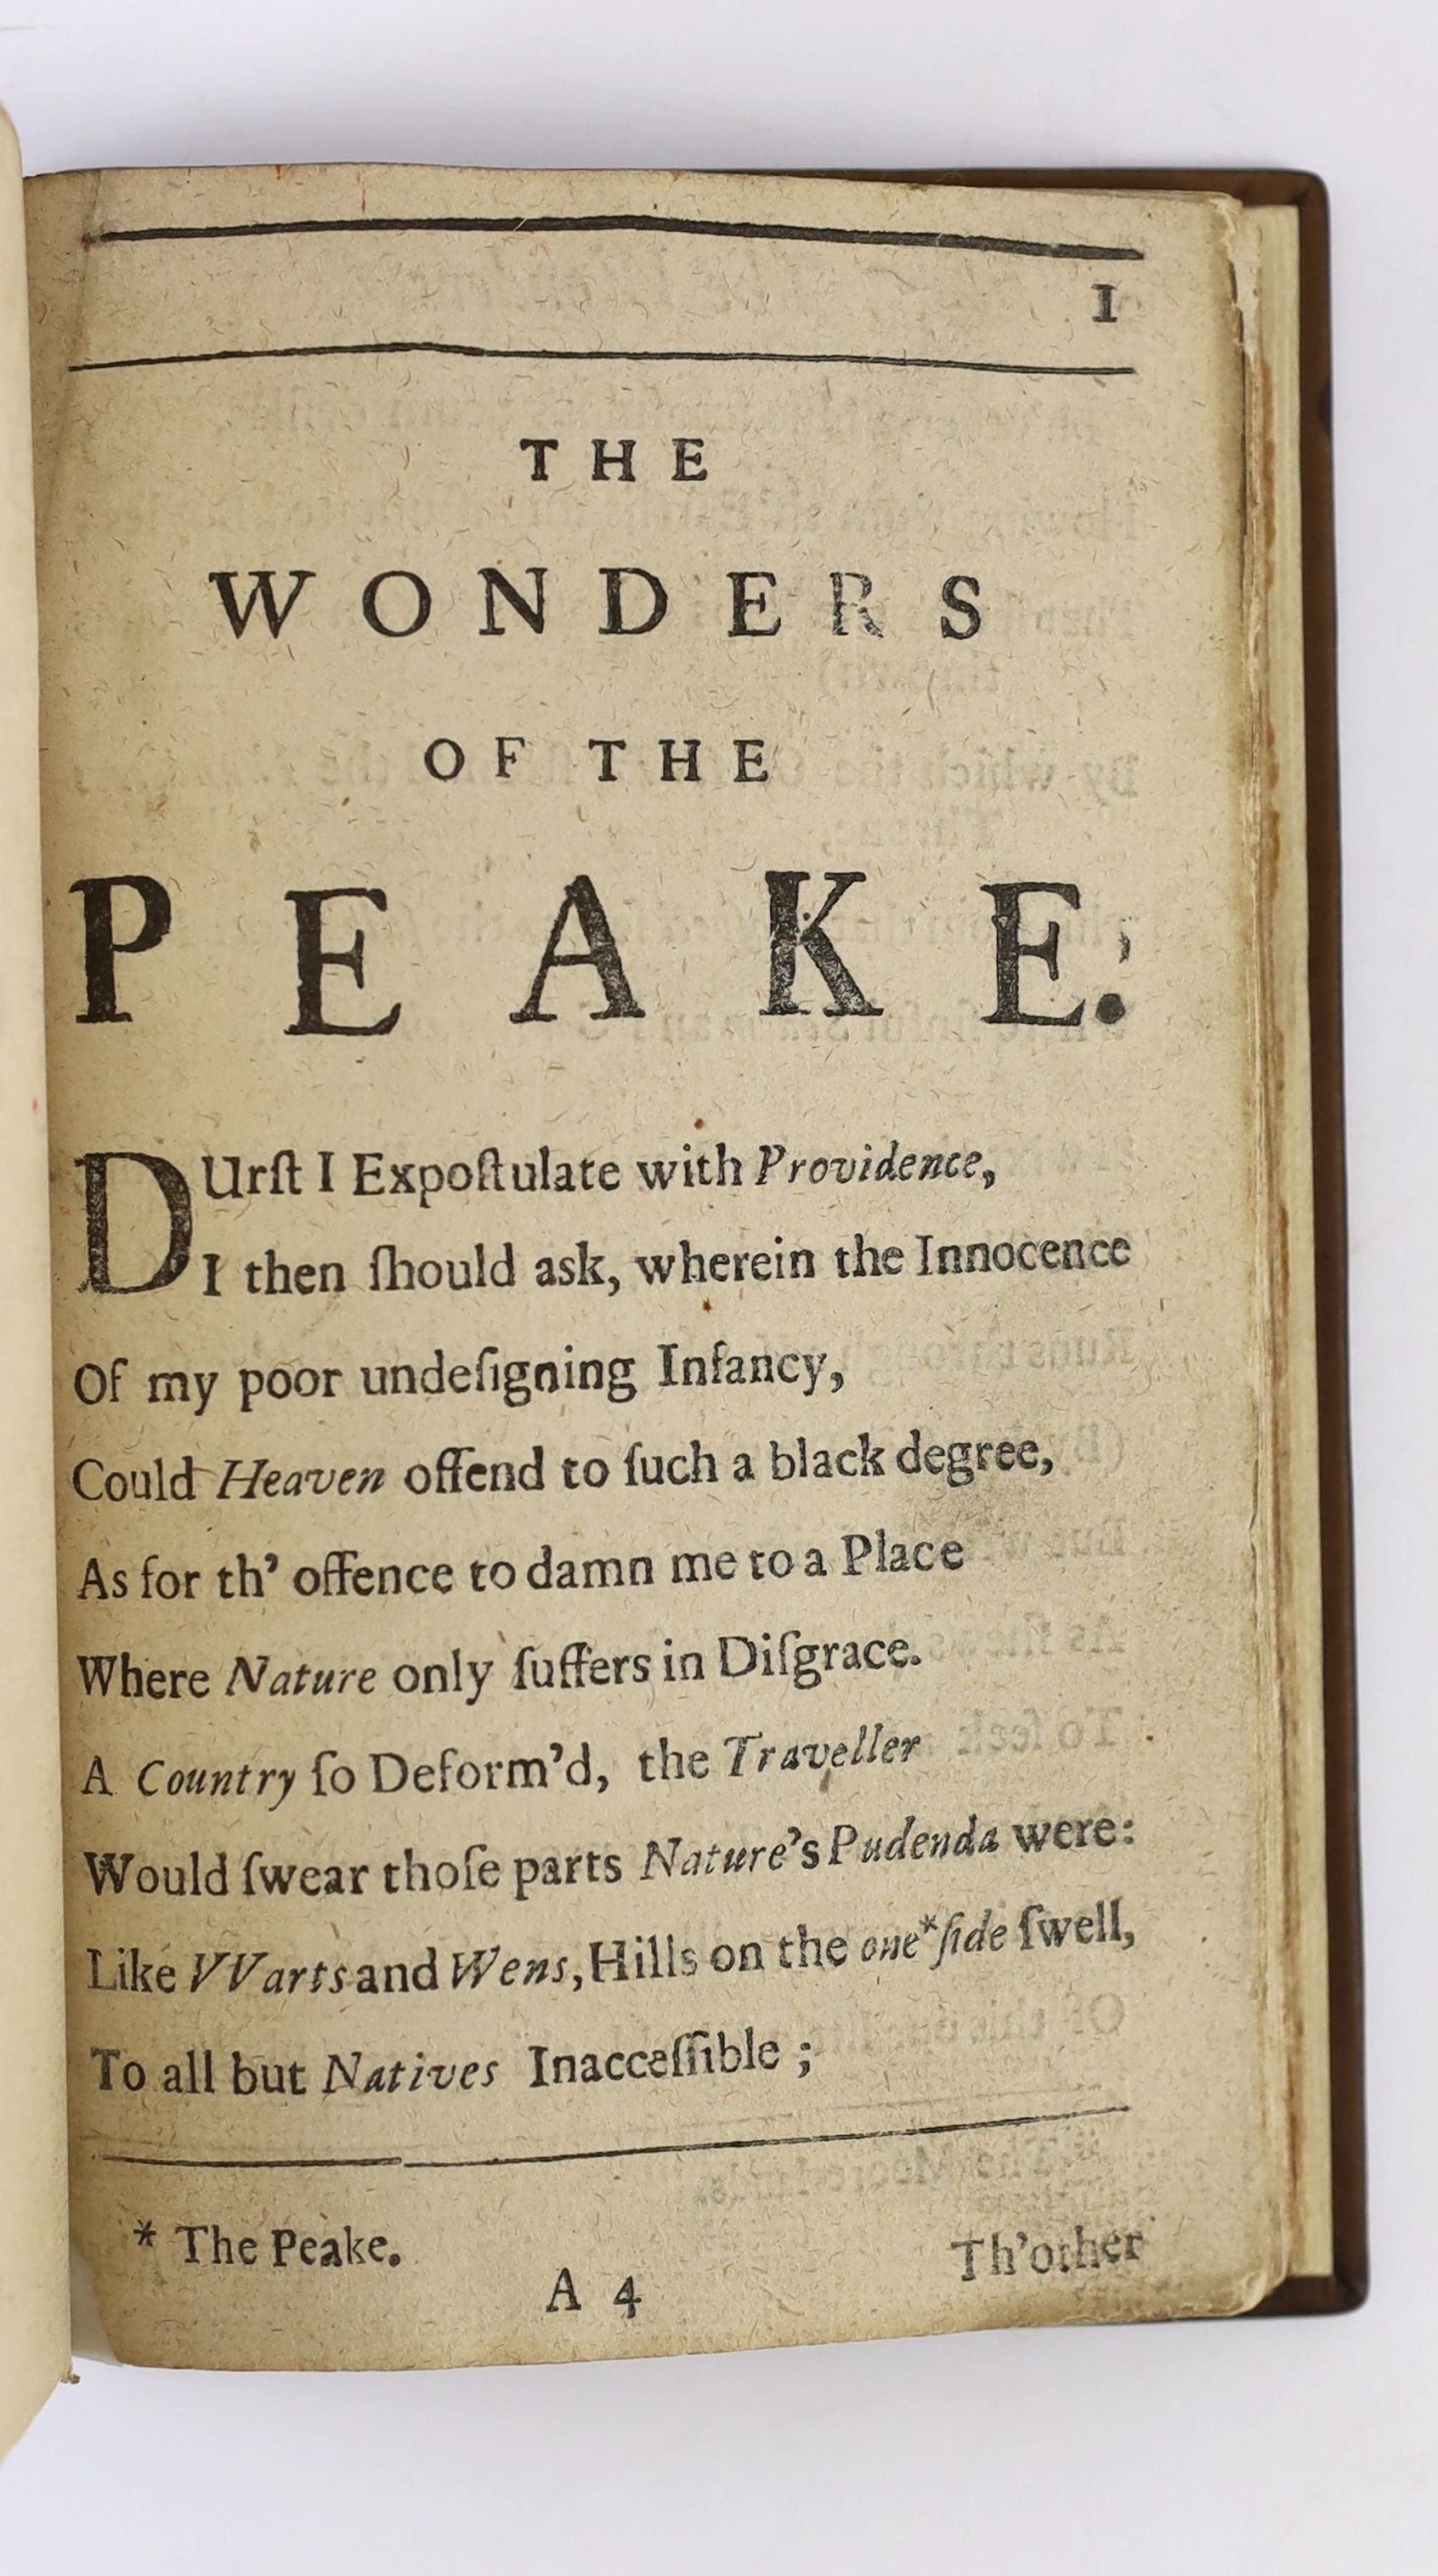 Cotton, Charles - The Wonders of the Peake, 4th edition 8vo, rebound calf gilt, with renewed fly leaves, contemporary ink ownership inscription to title, Charles Brome, London, 1699